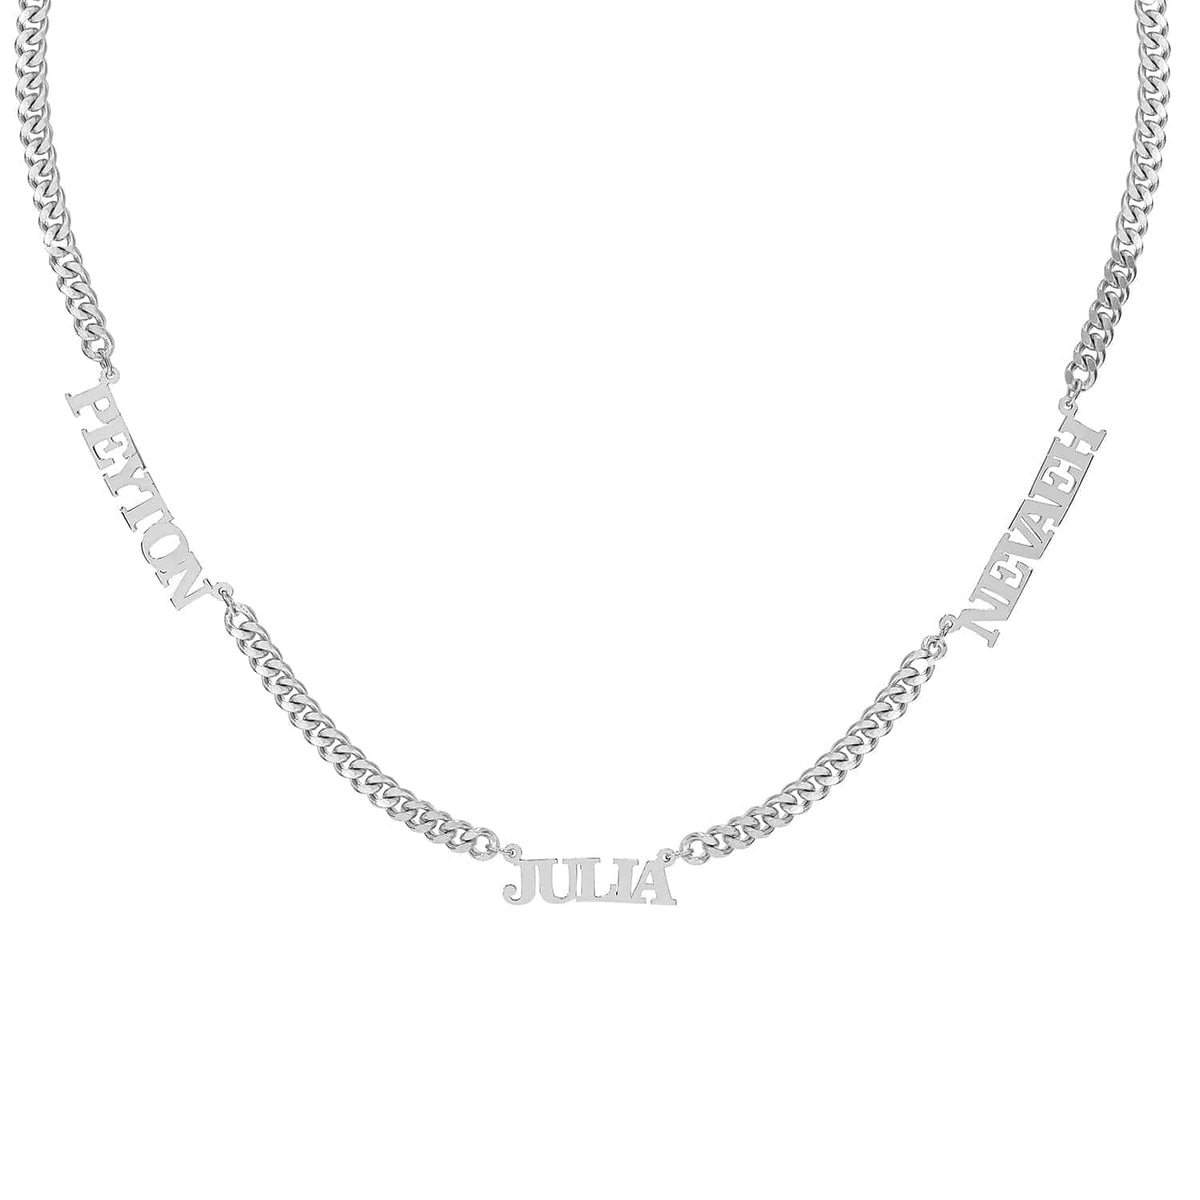 Sterling Silver / Cuban Chain Personalized Nameplate Necklace w/ Three Names on Cuban Chain